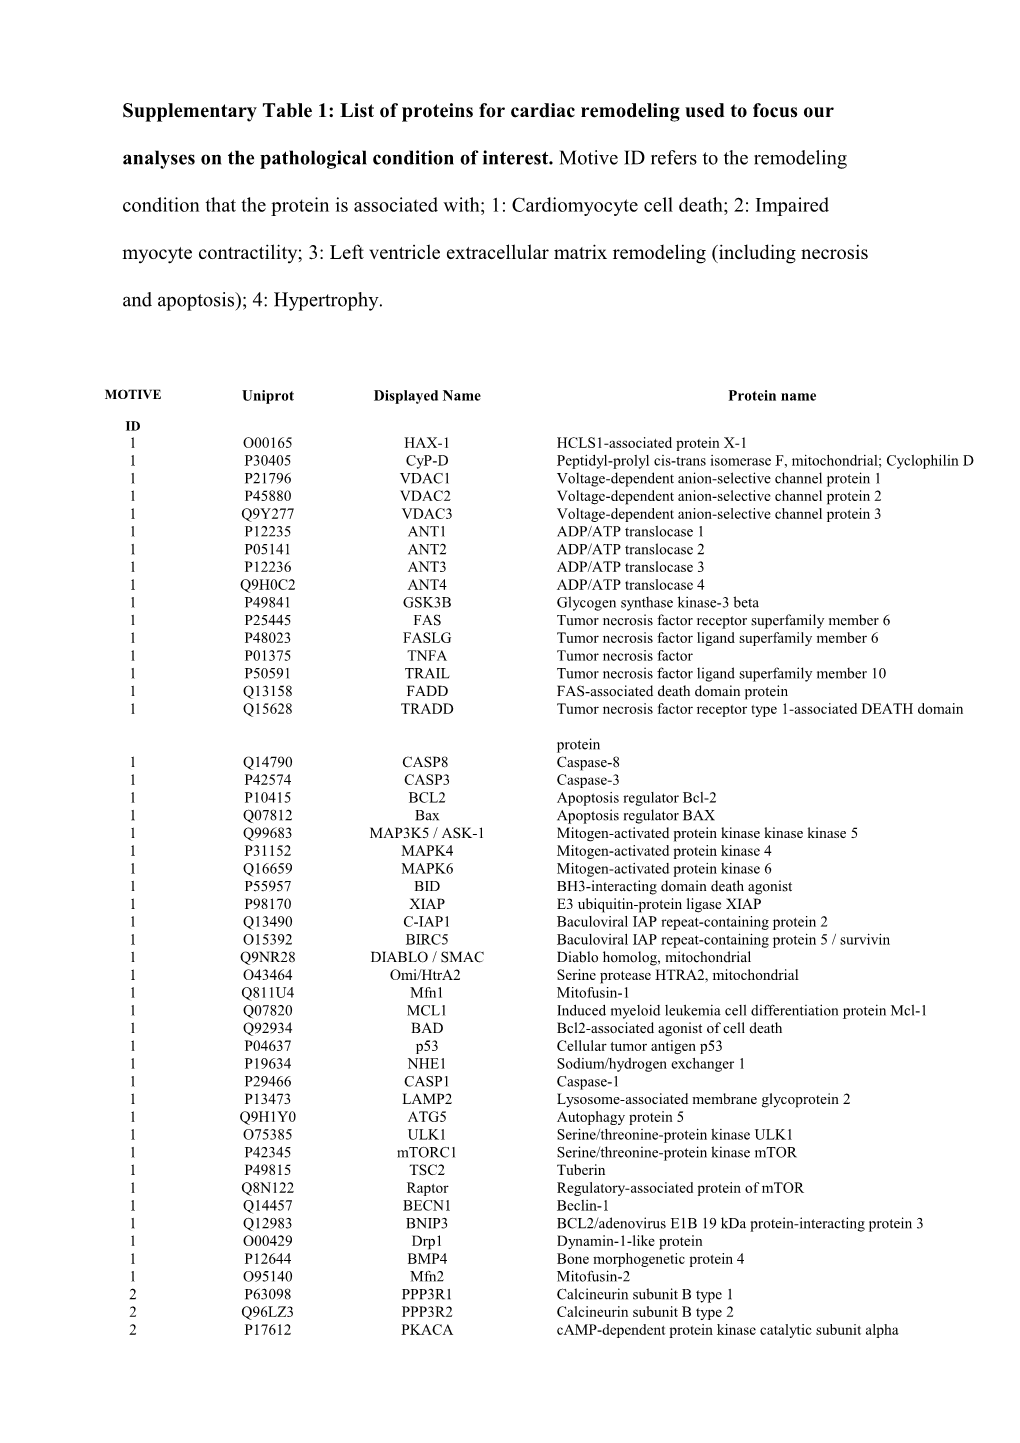 Supplementary Table 1: List of Proteins for Cardiac Remodeling Used to Focus Our Analyses